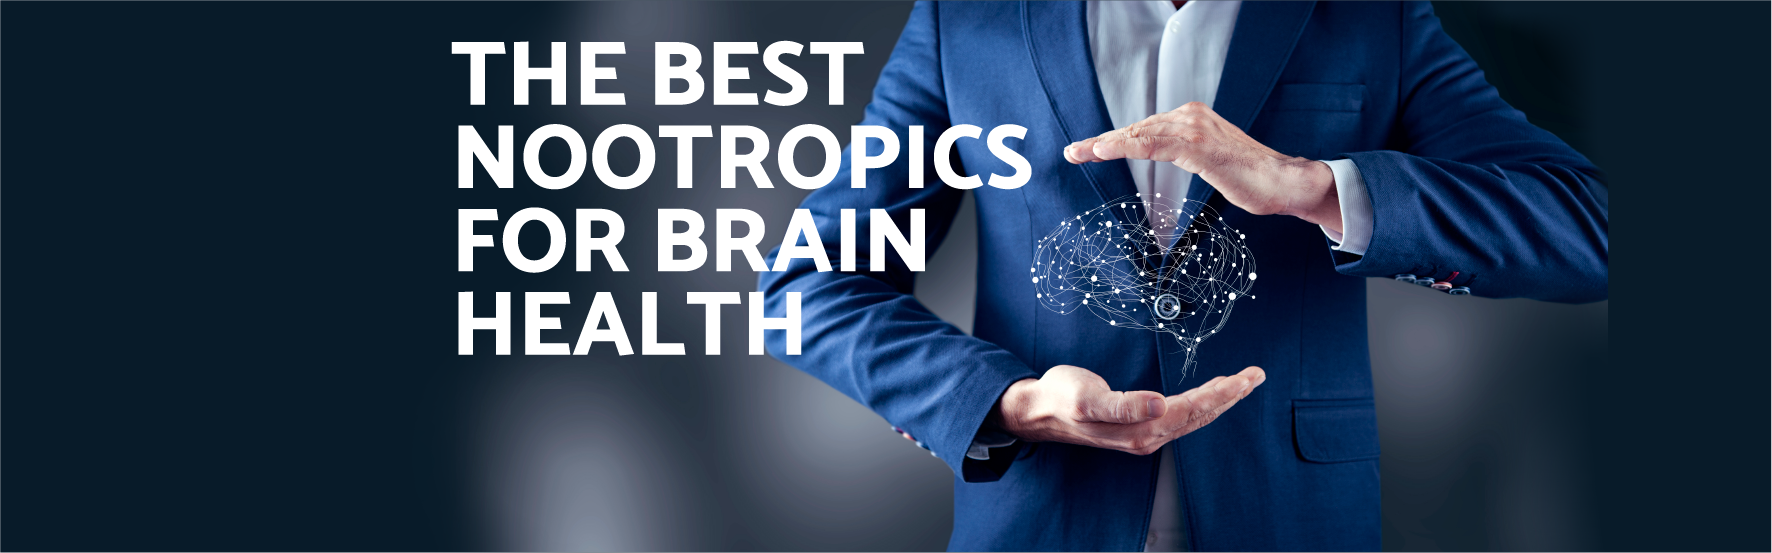 The Best Nootropics for Brain Health | Articles | OPTMZ | 